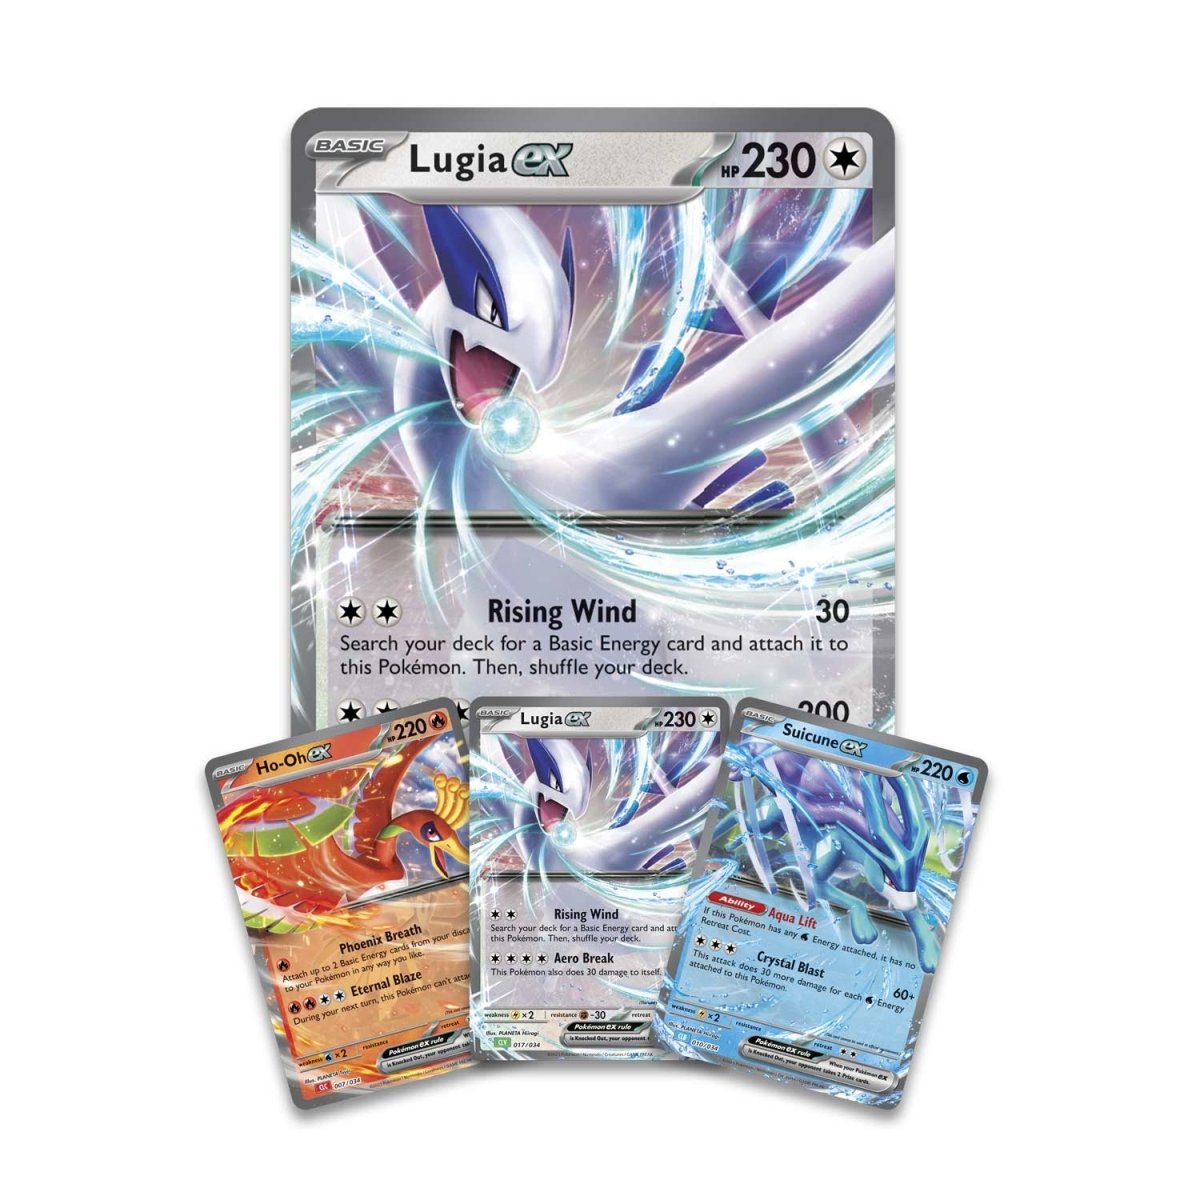 Pokemon TCG: Combined Powers Premium Collection-The Pokémon Company International-Ace Cards & Collectibles